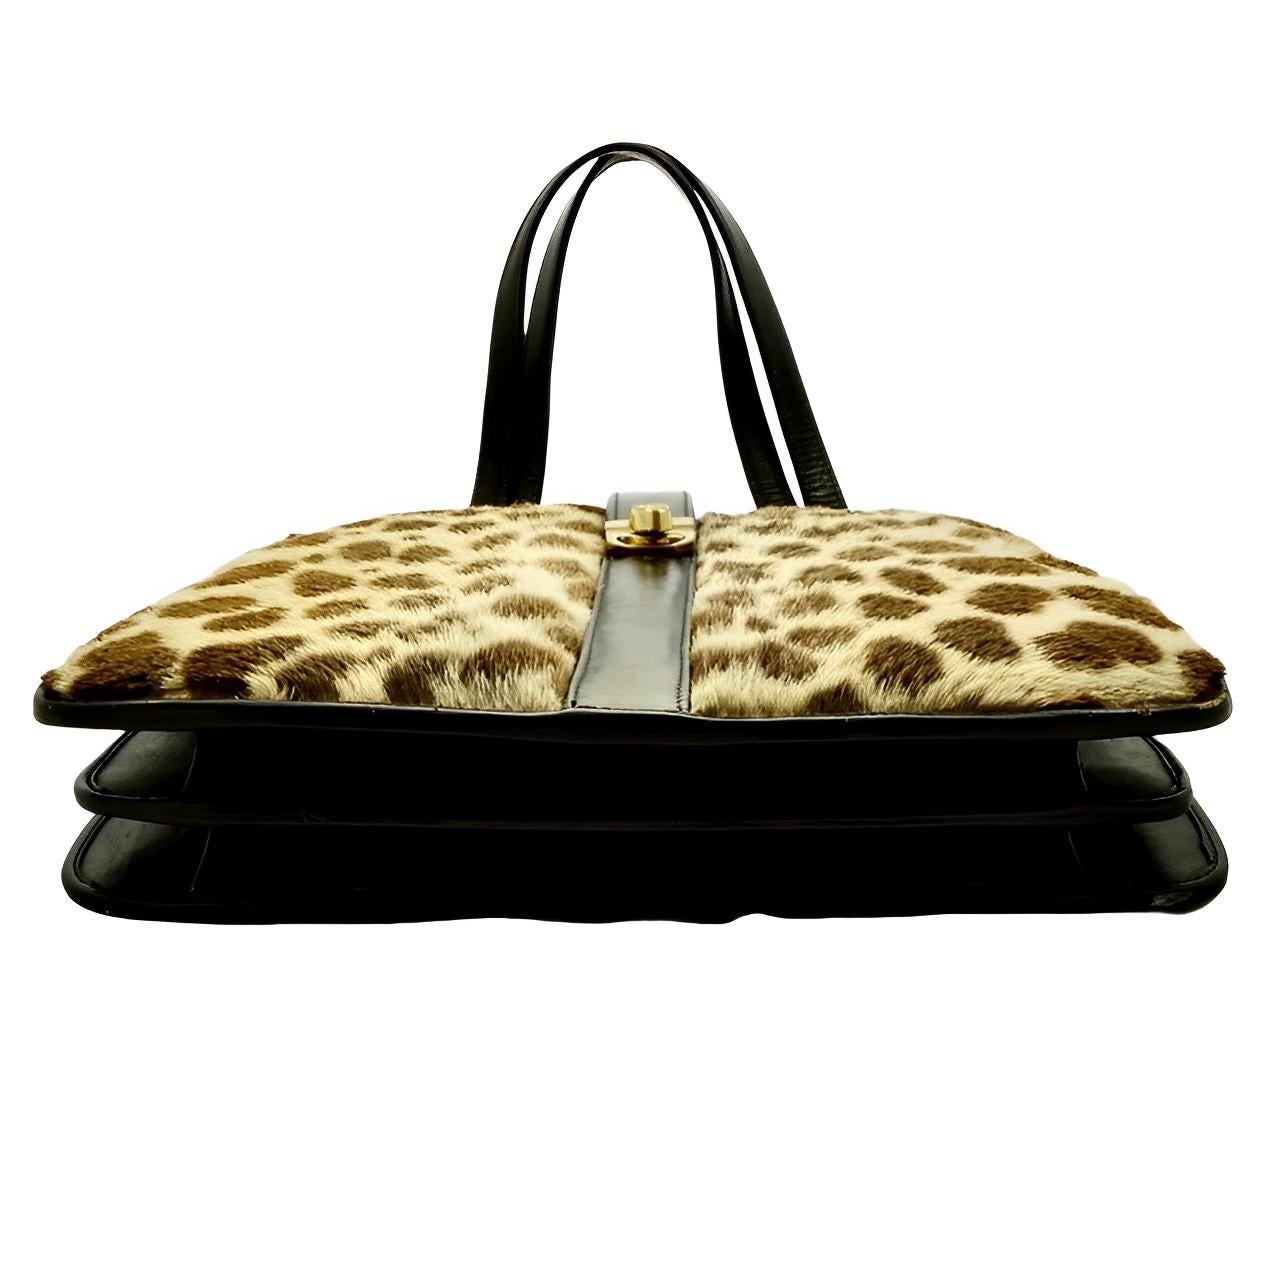 Women's or Men's Black Leather and Spotted Fur Hand Bag with Gold Plated Fittings circa 1950s For Sale